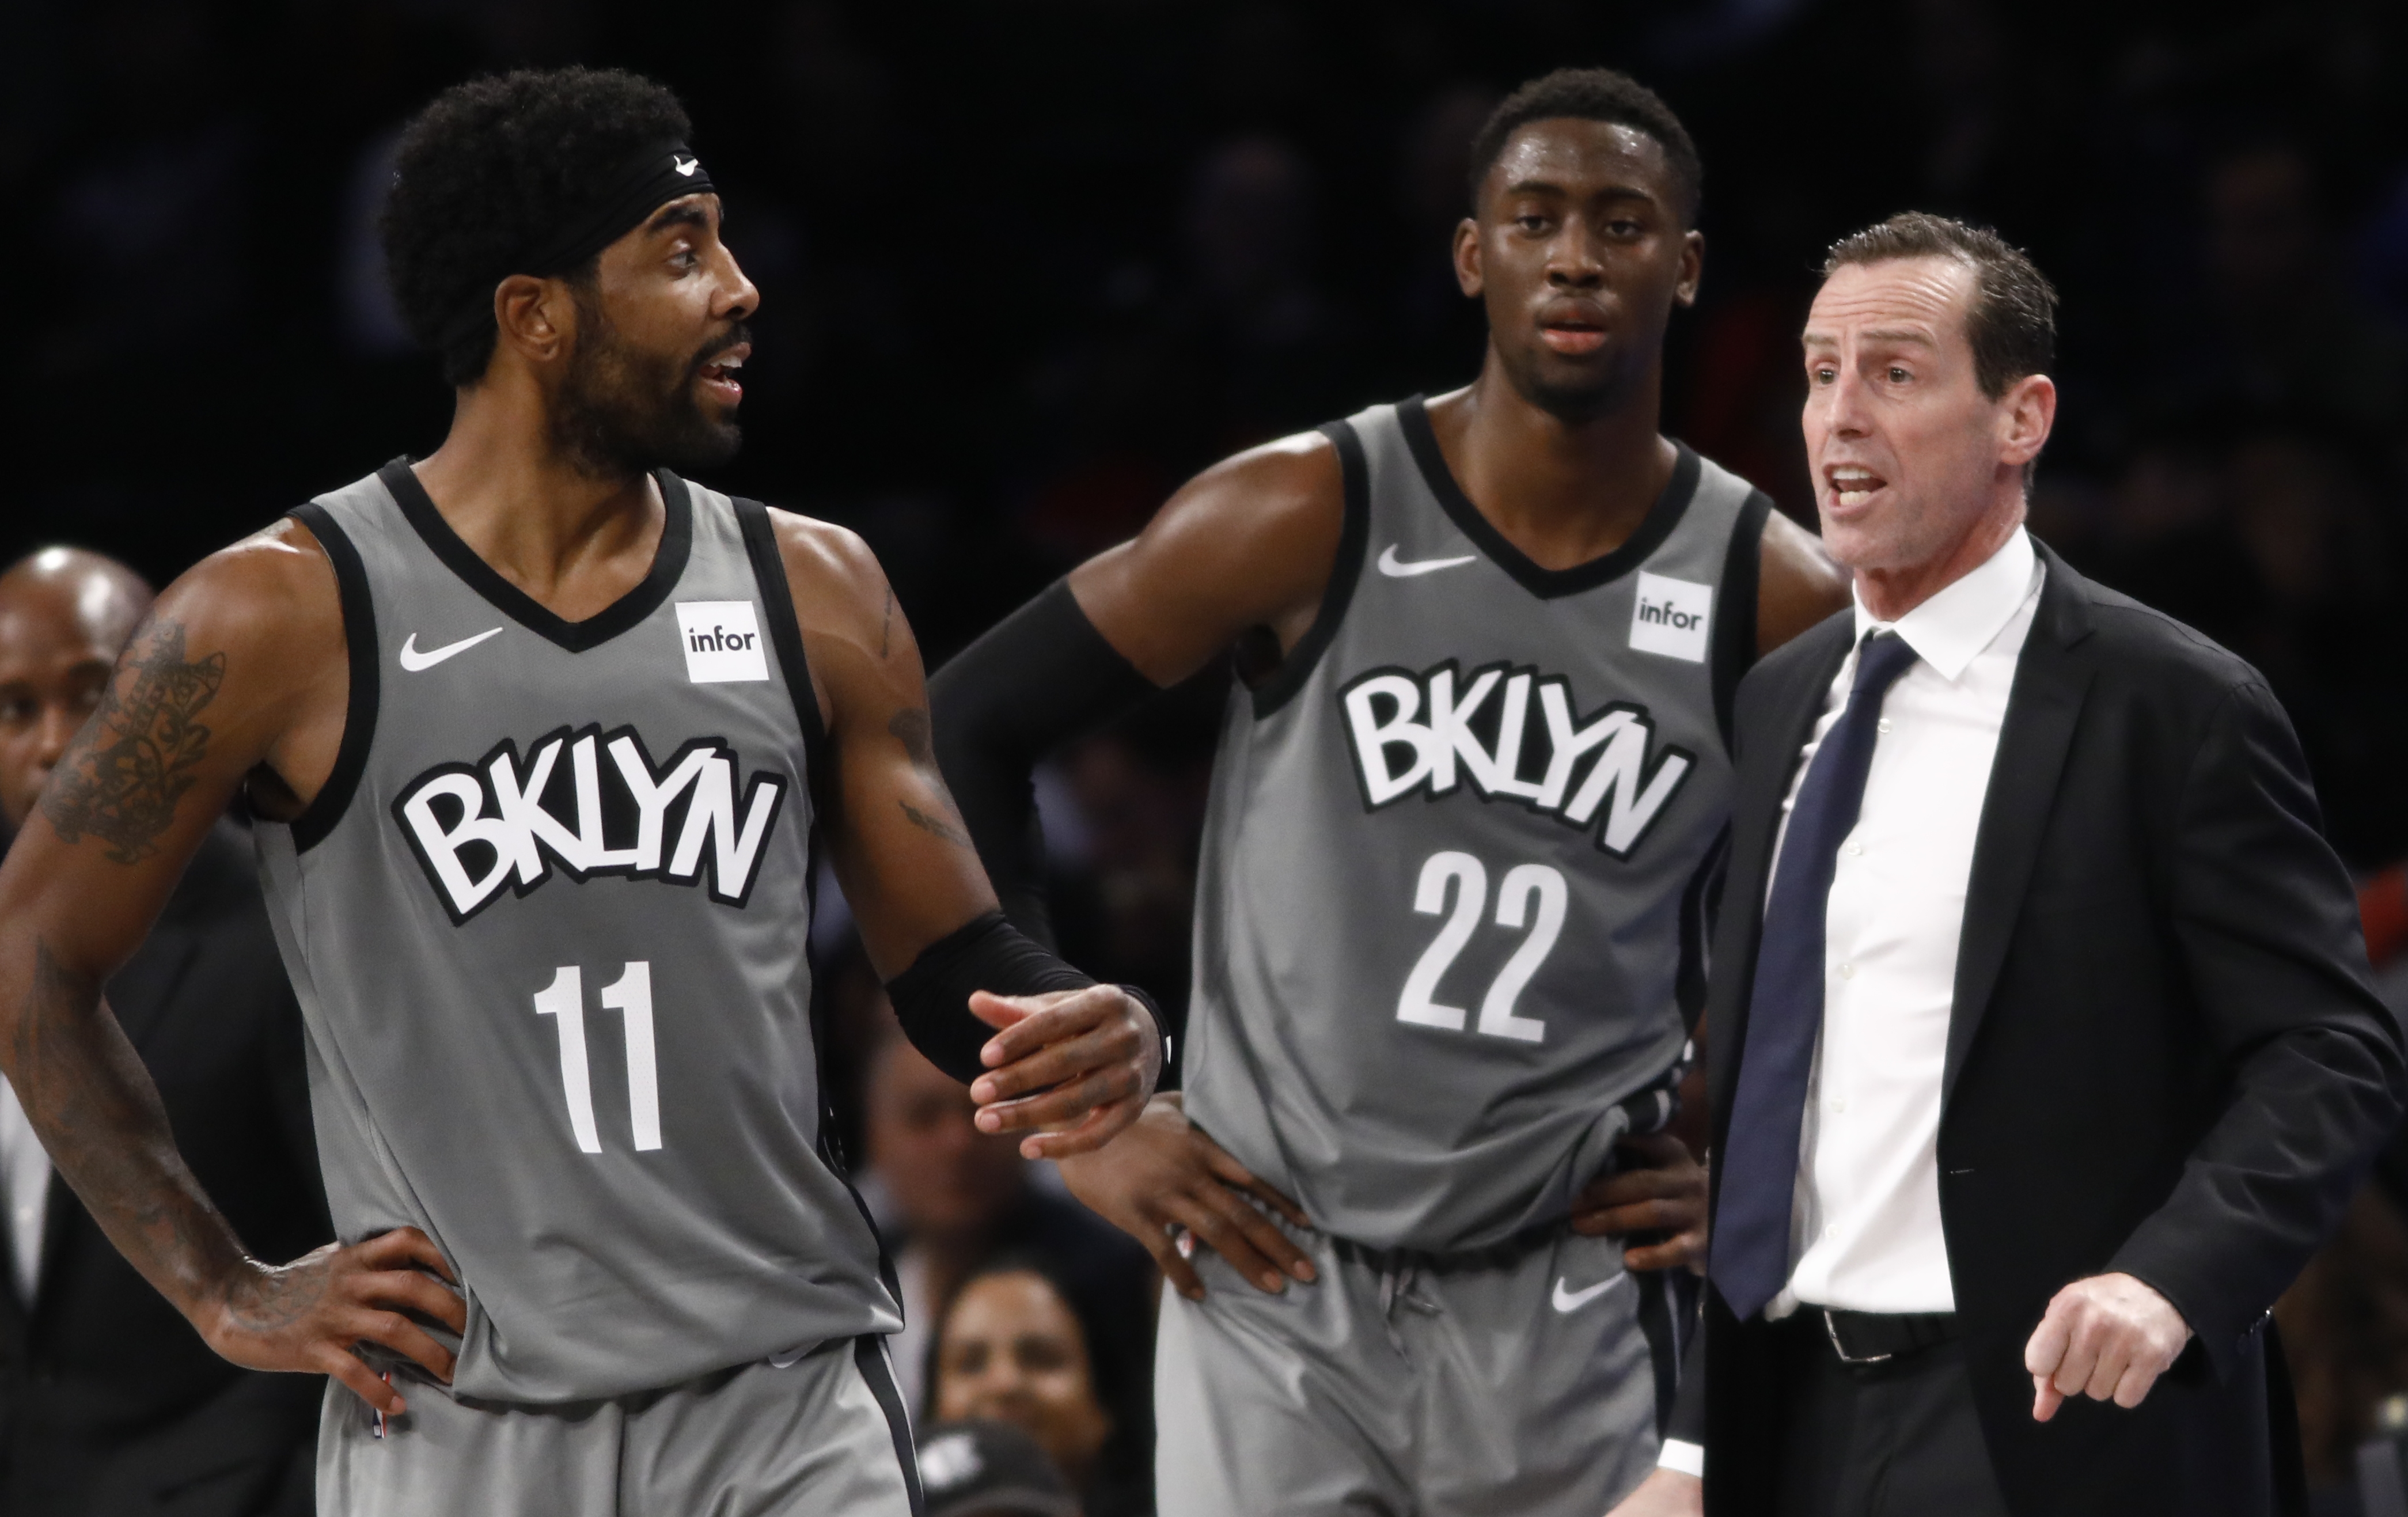 Kyrie Irving Caris LeVert Kenny Atkinson Nets Pelicans 2019